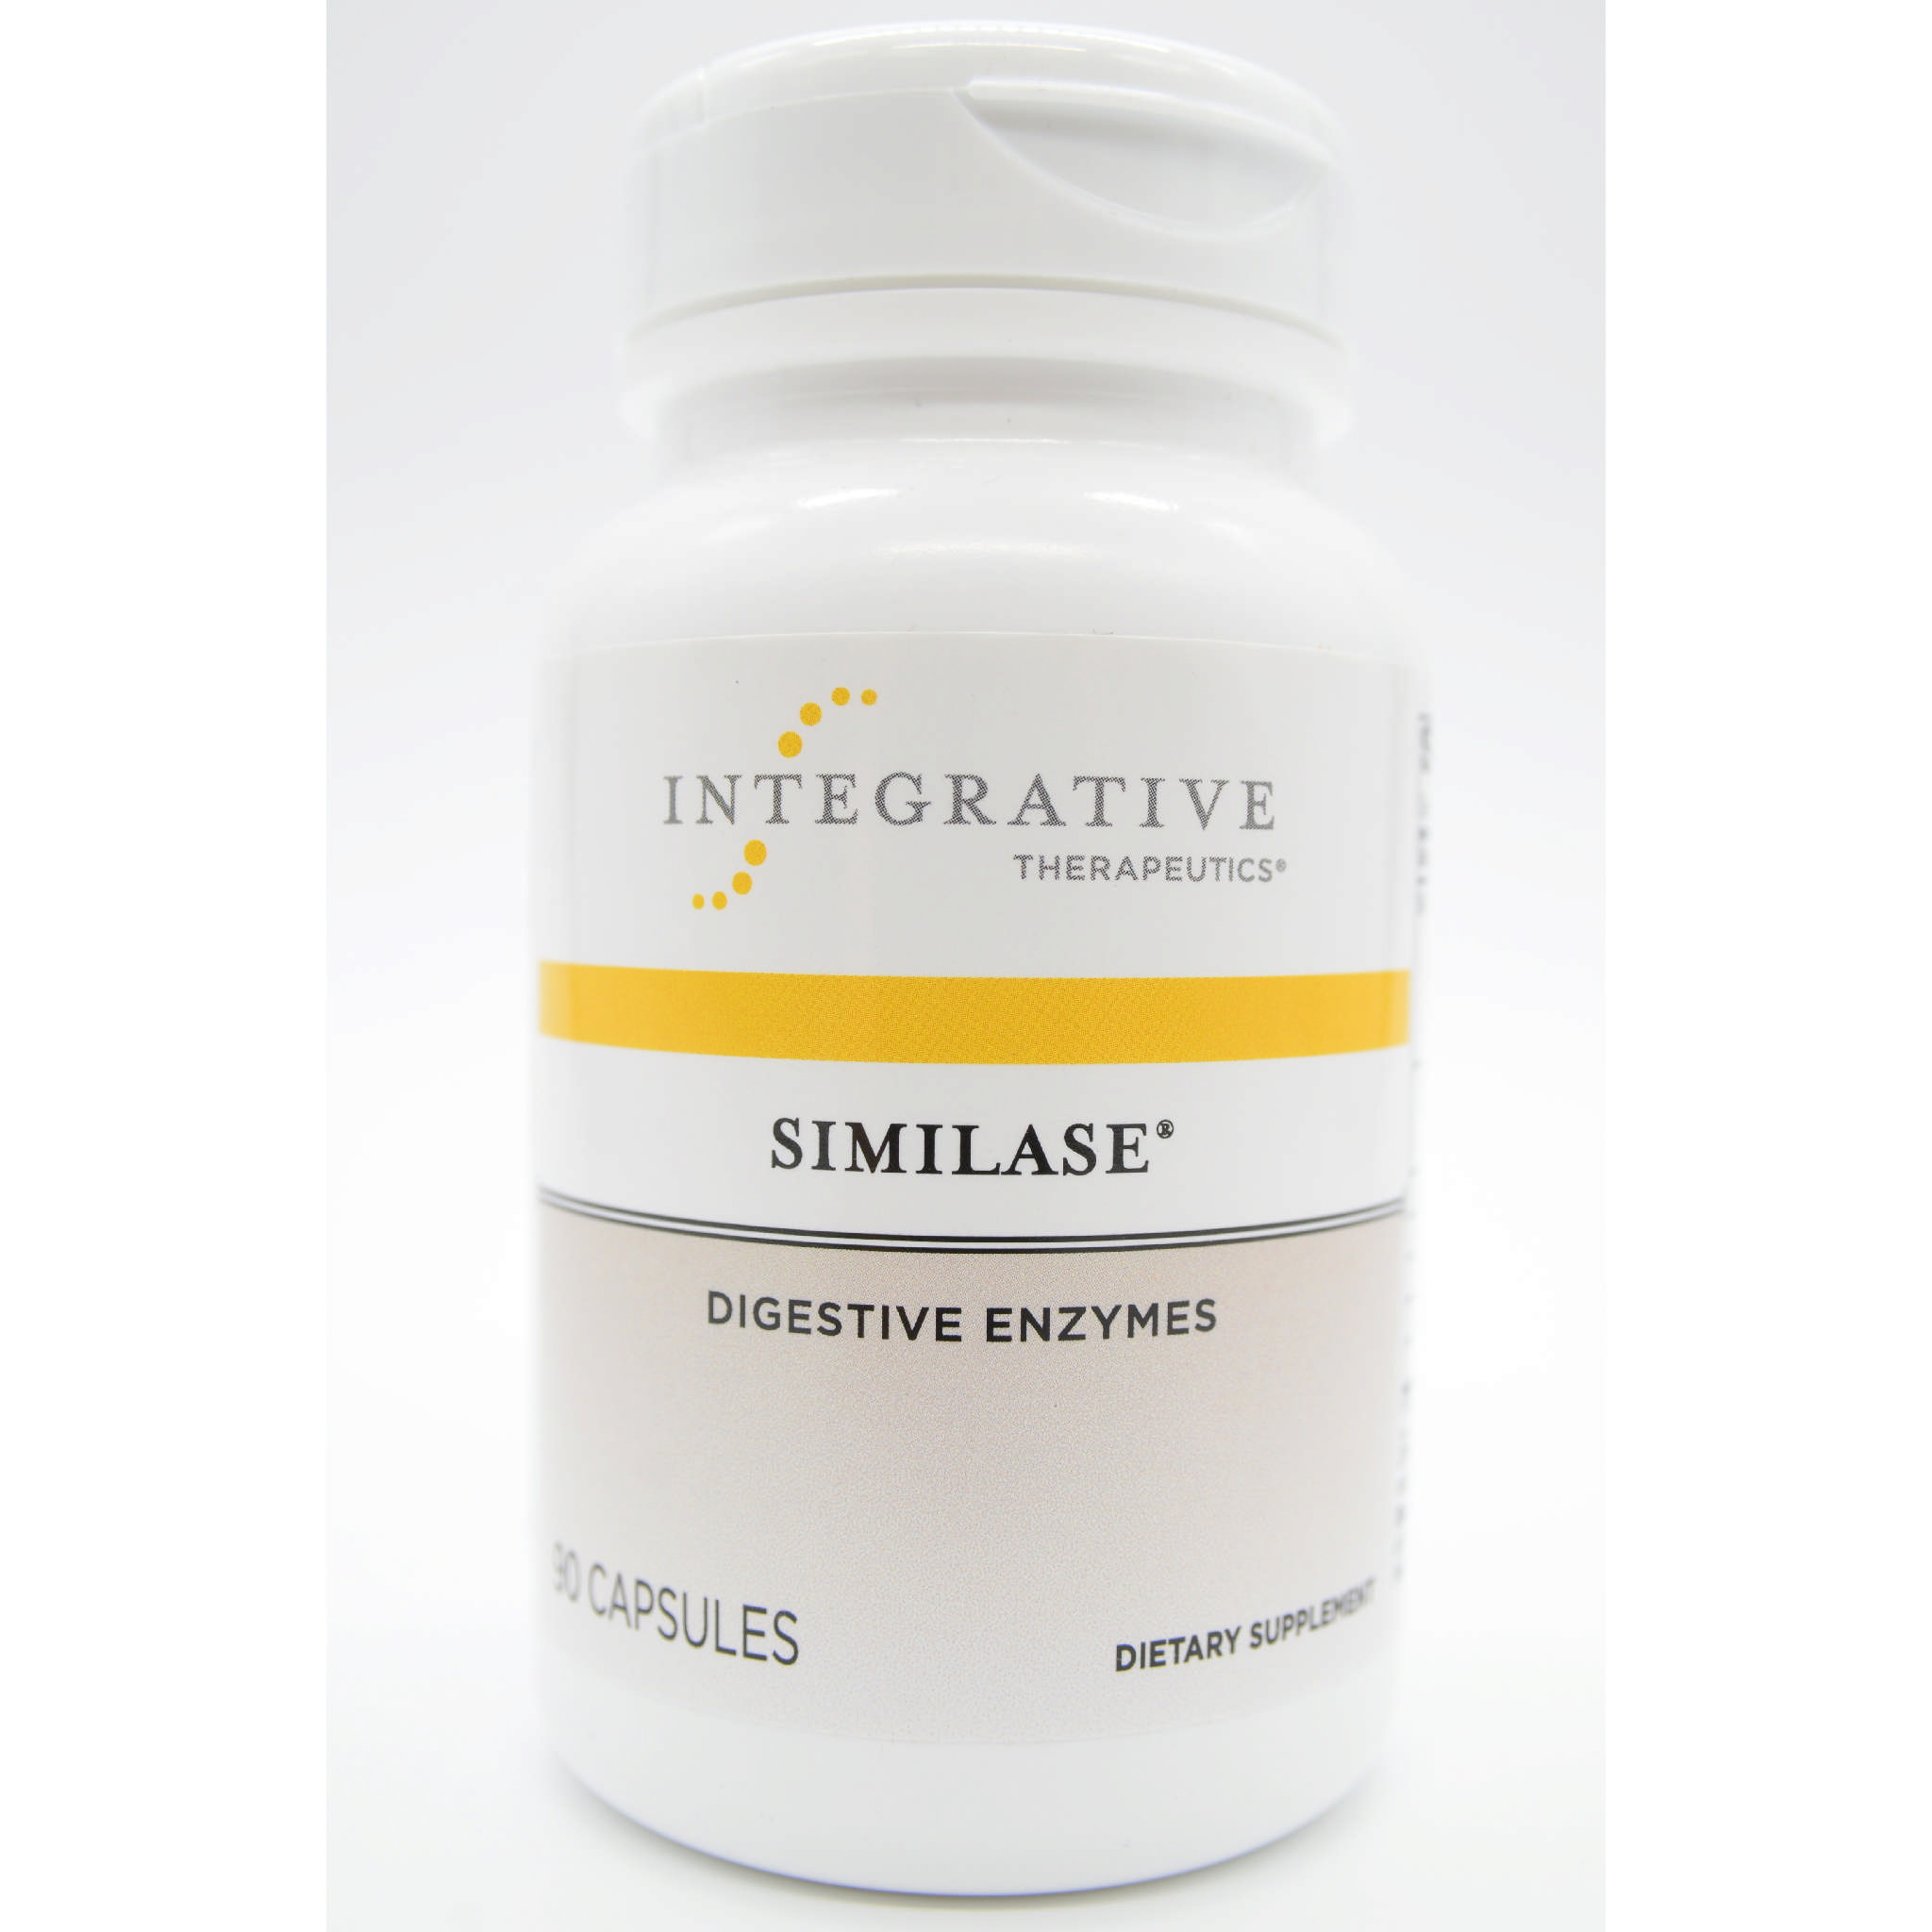 Integrative Therapy - Similase